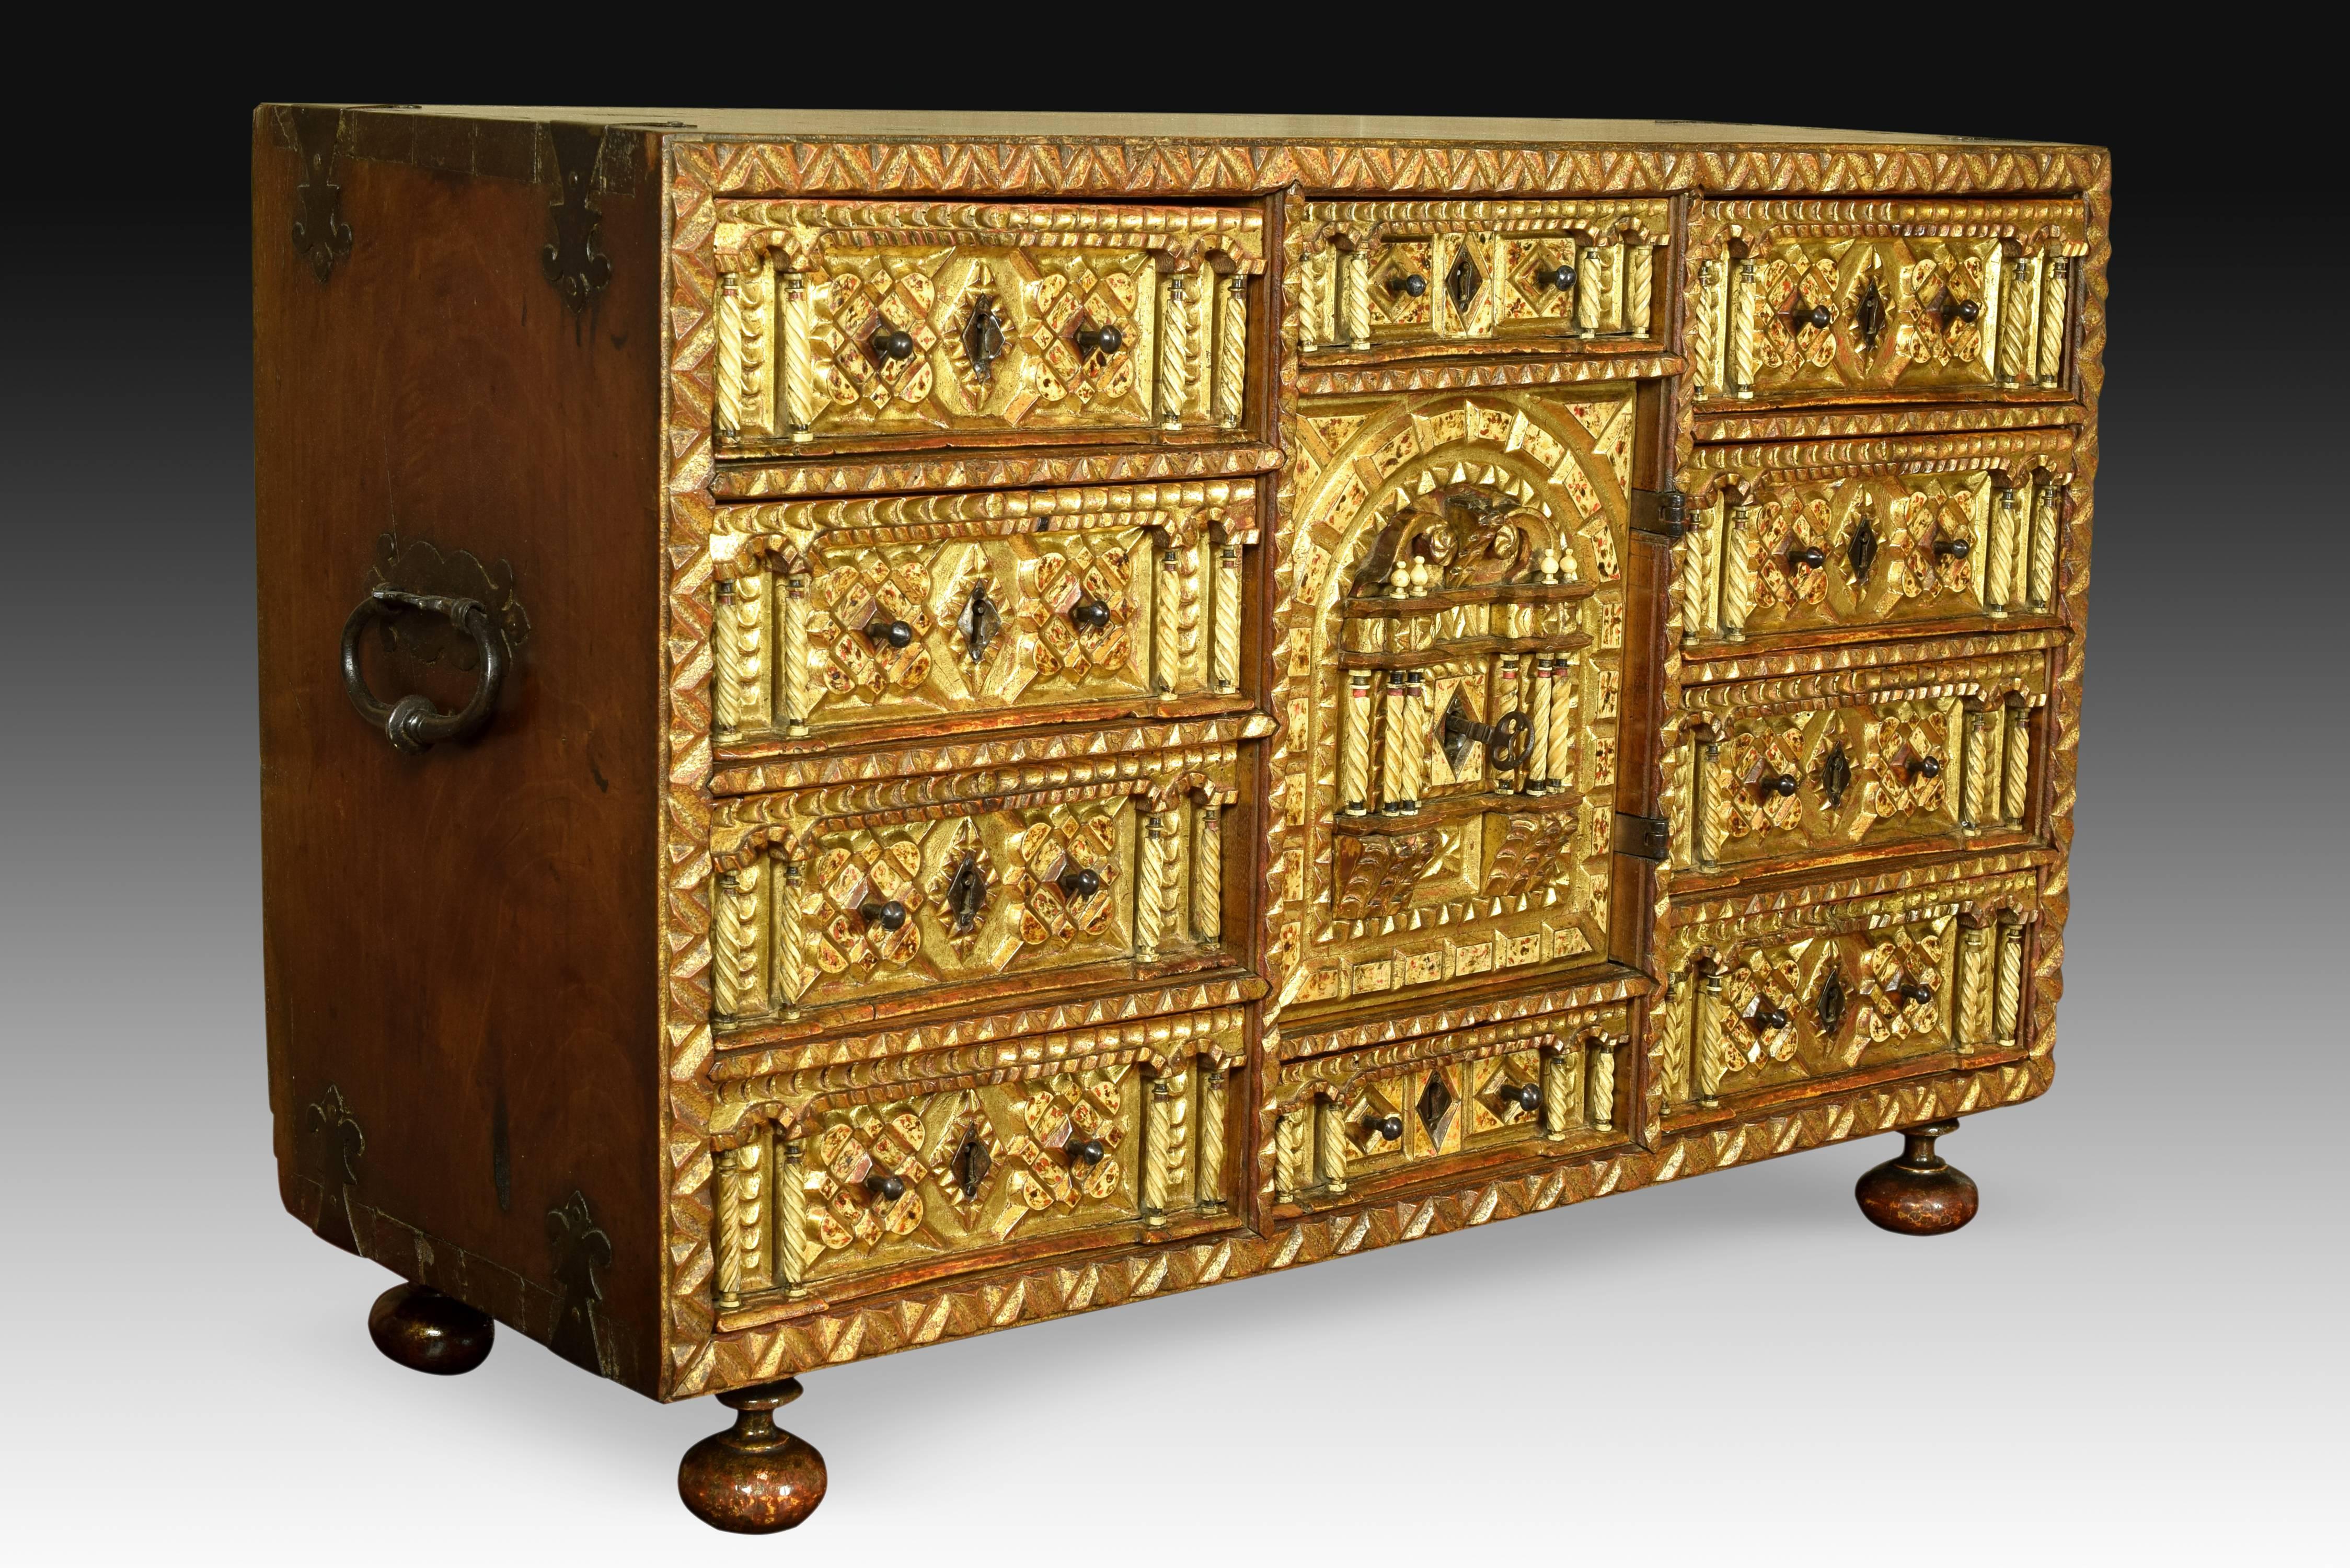 Walnut wood desk with box structure, without front cover whose front appears in view. It has 10 drawers and a central door with drawers in the interior show a decoration of carved wood, gold and with plates embedded bone creating geometric